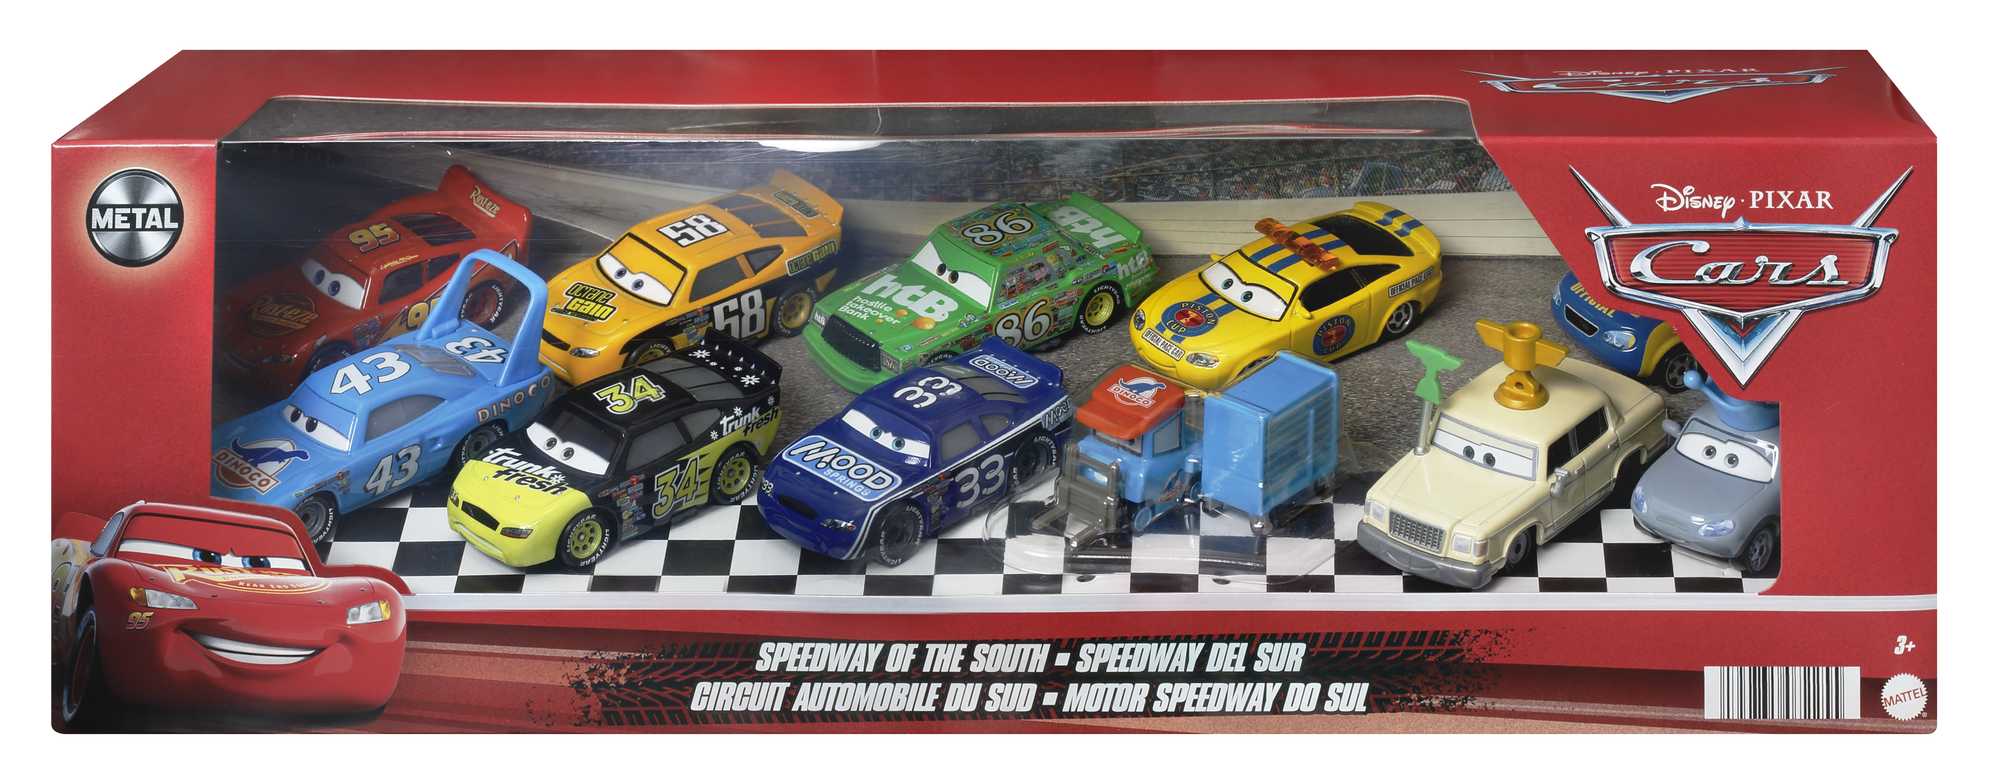 Disney and Pixar Cars Speedway of the South 11-Pack | Mattel